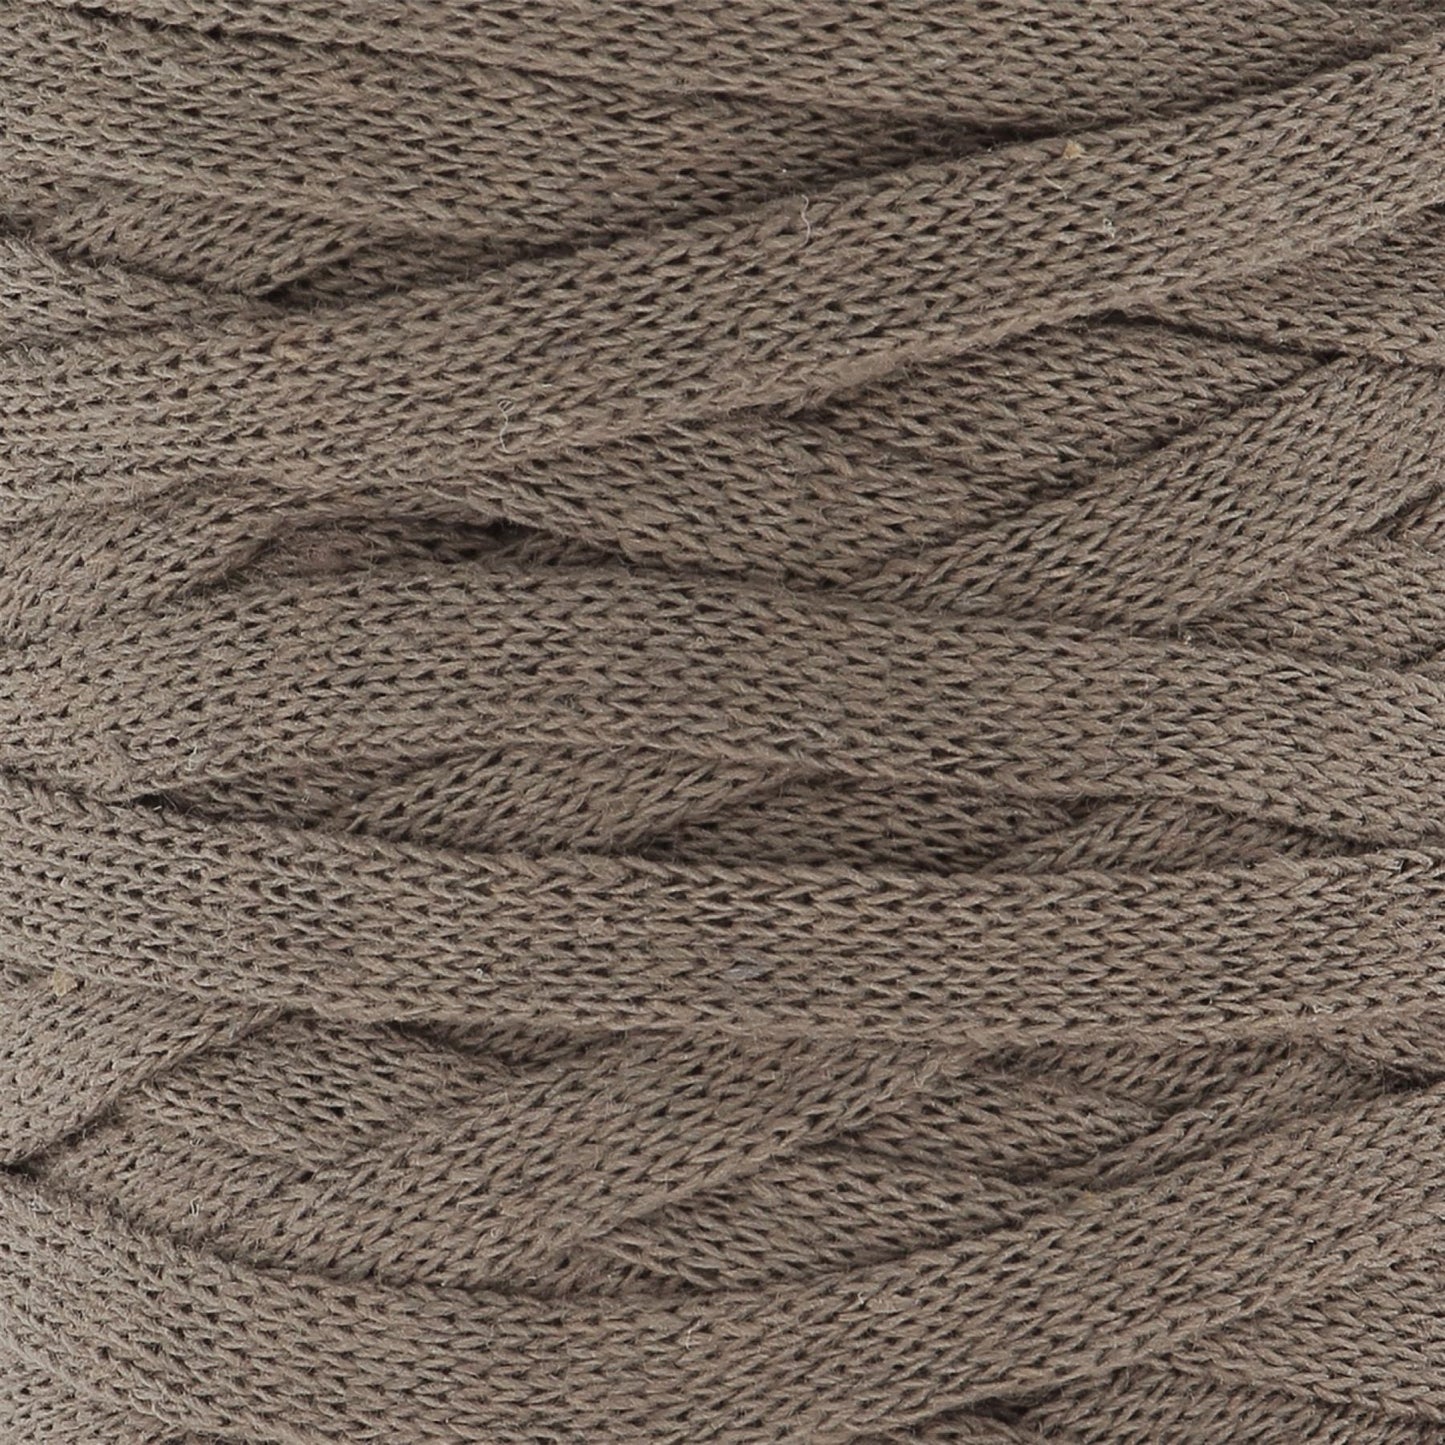 RXL48 RibbonXL Earth Taupe Cotton Yarn - 120M, 250g